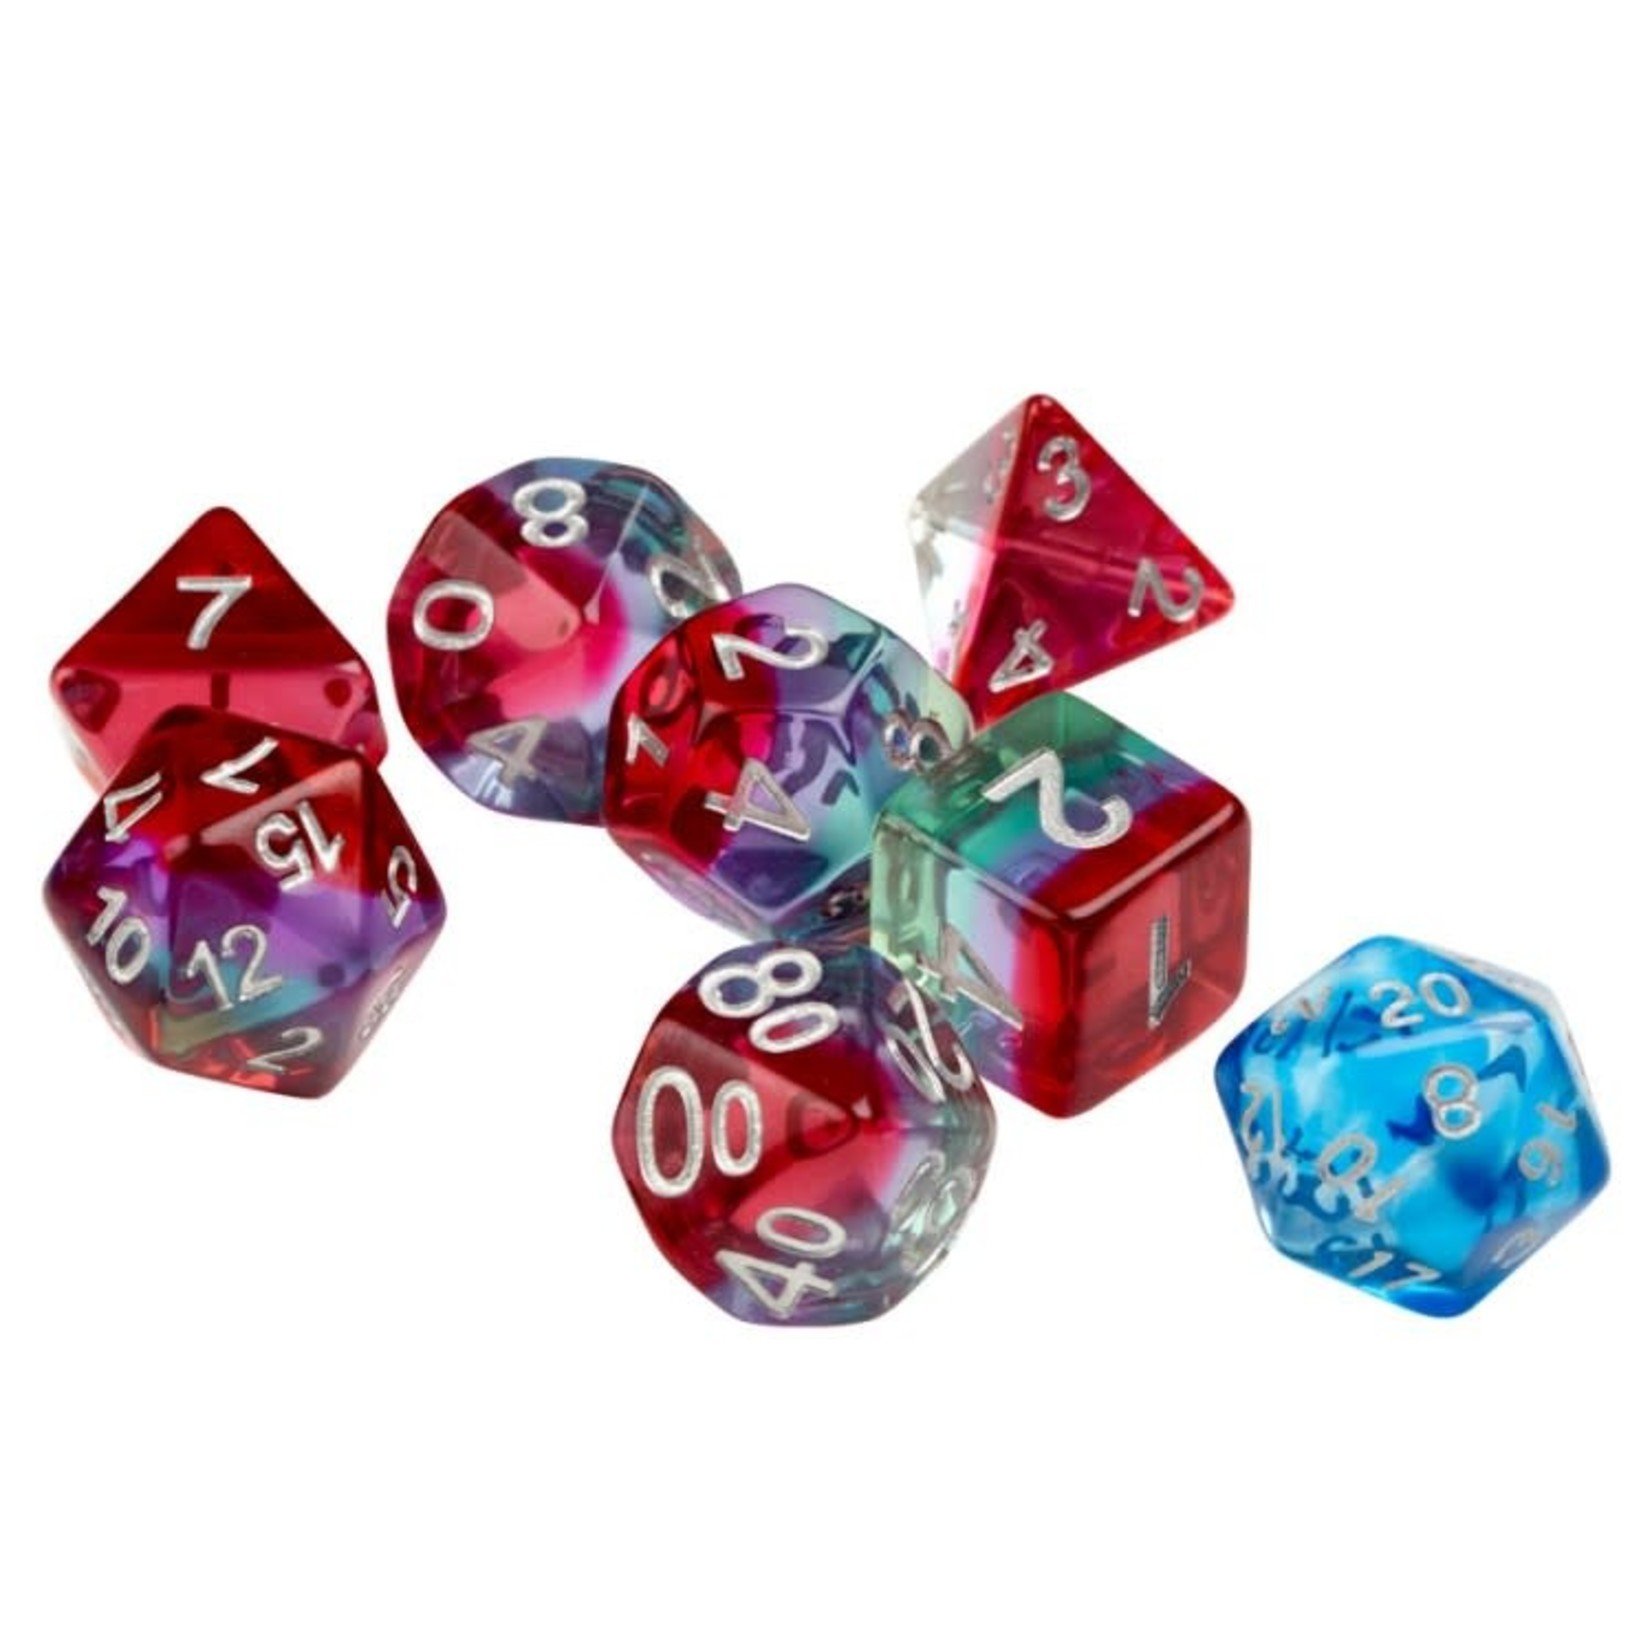 Sirius RPG Dice Watermelon Translucent Green / Pink with Silver Polyhedral 8 die set